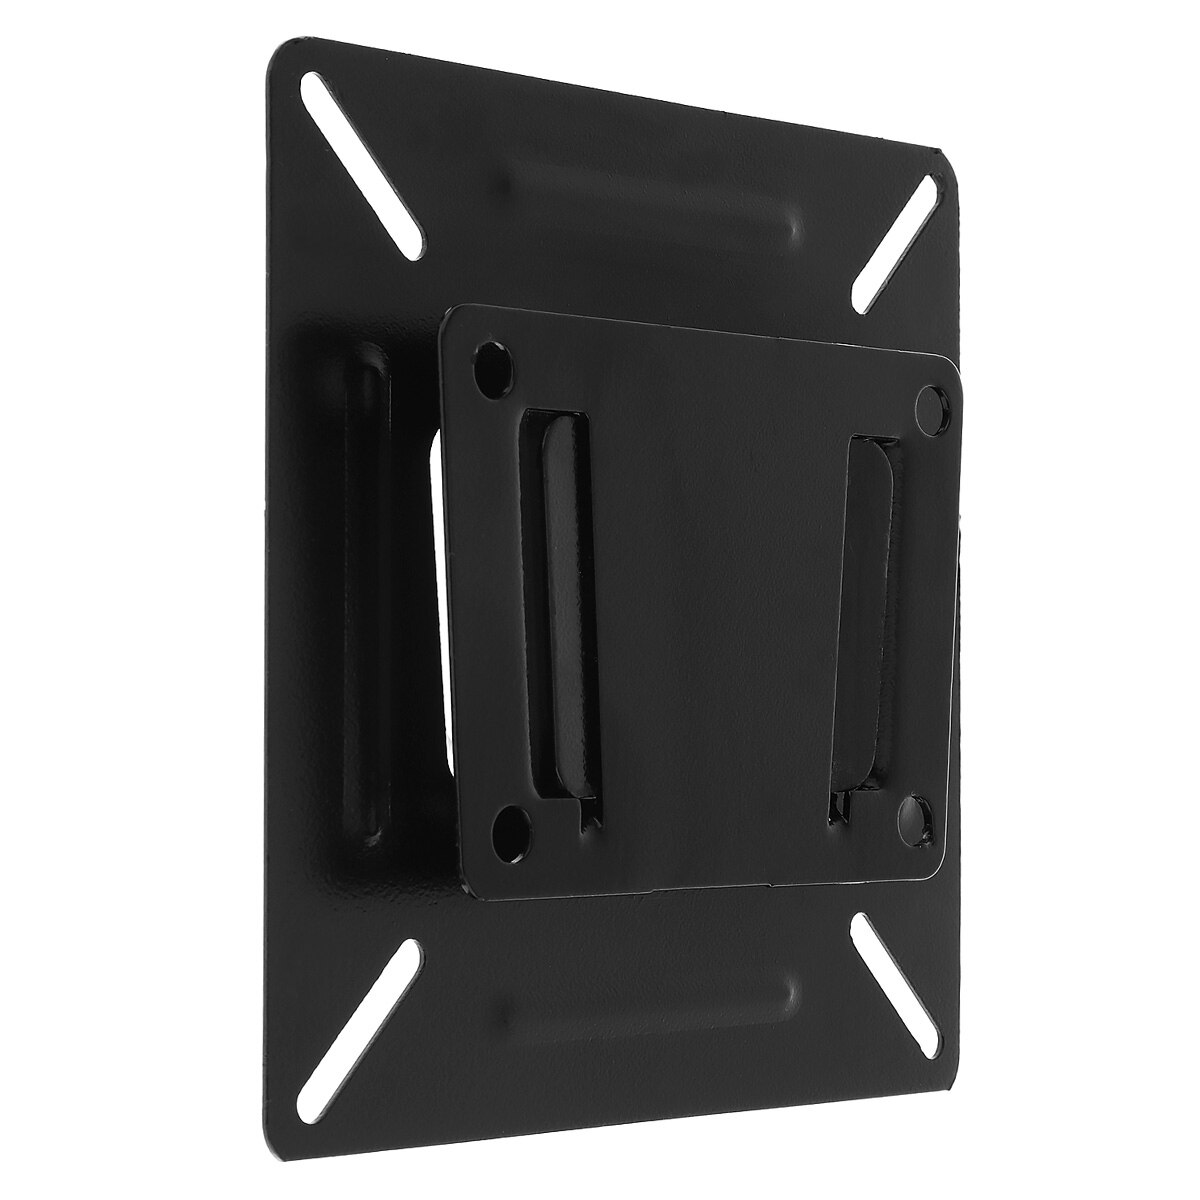 Universal Black 15KG SPHC with Coating Finished TV Wall Mount Bracket for 14-24 Inch LCD LED Monitor Flat Panel TV Frame